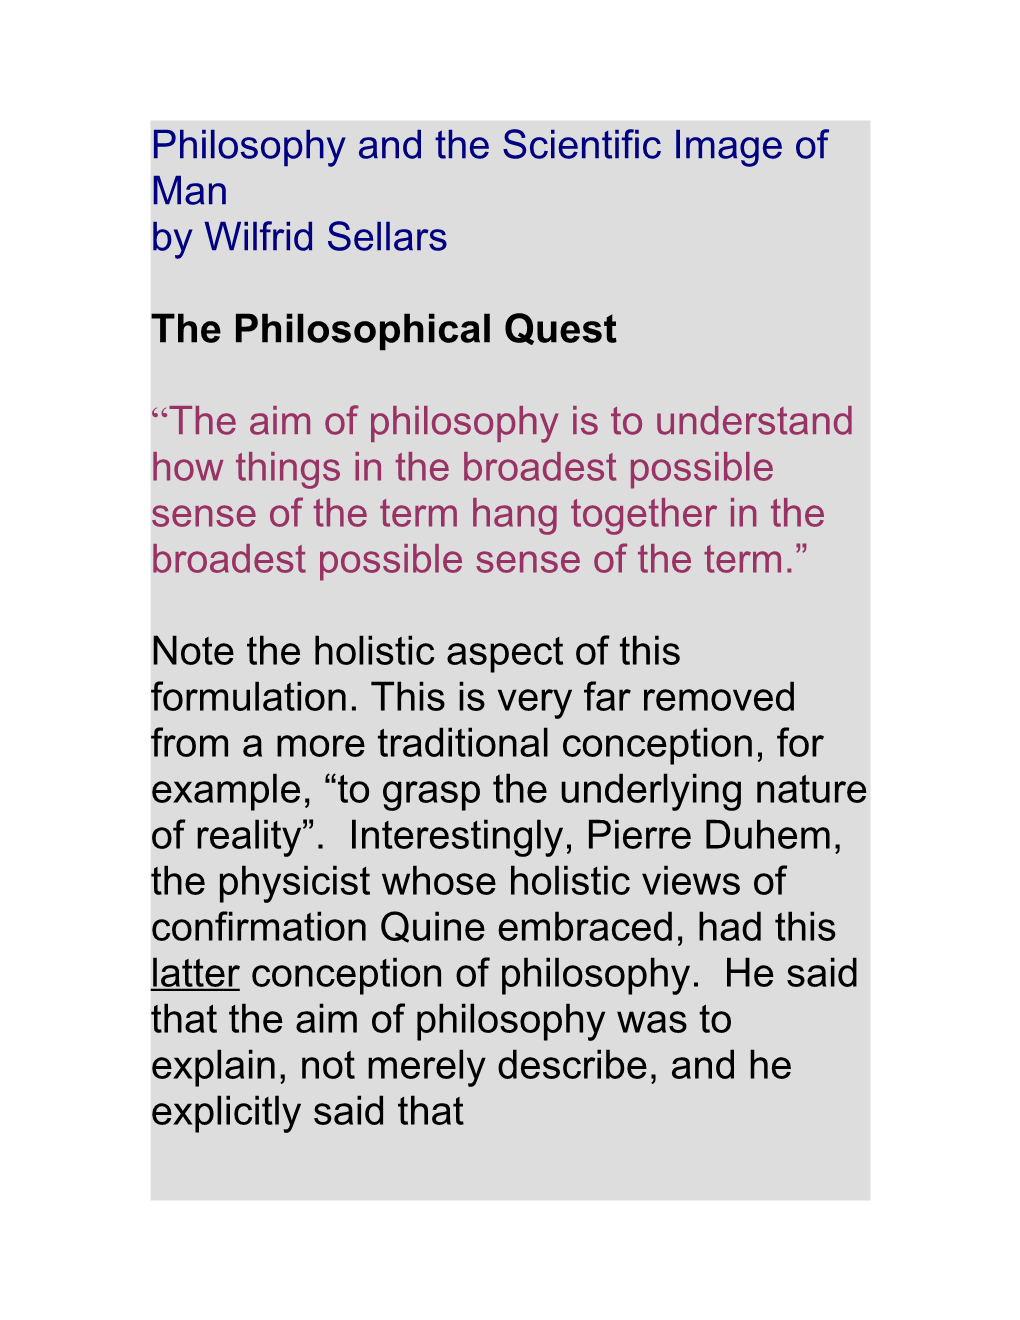 Philosophy and the Scientific Image of Man